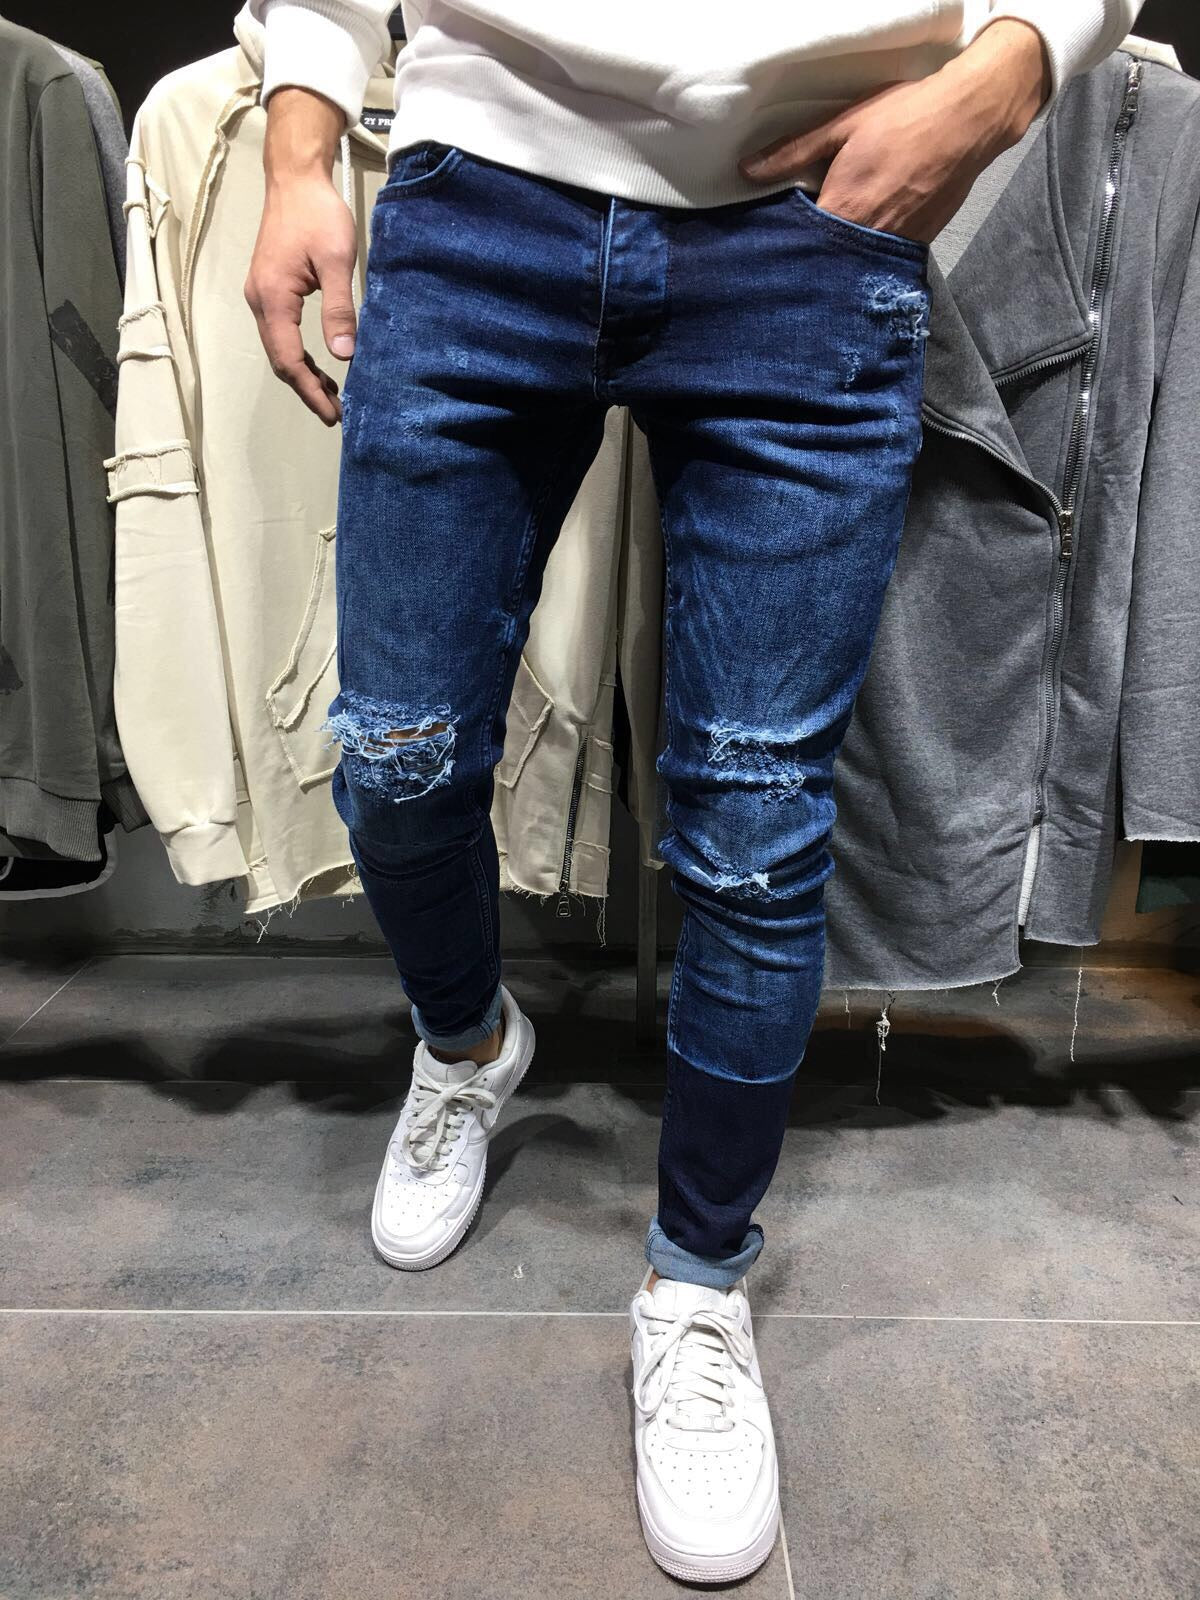 Mens Ripped Skinny Jeans Fashionable Streetwear Pants For Casual And Slim  Fit Look, Blue Denim Jeans Trousers For Men In Sizes S 3XL J230806 From  Carol_store, $14.54 | DHgate.Com